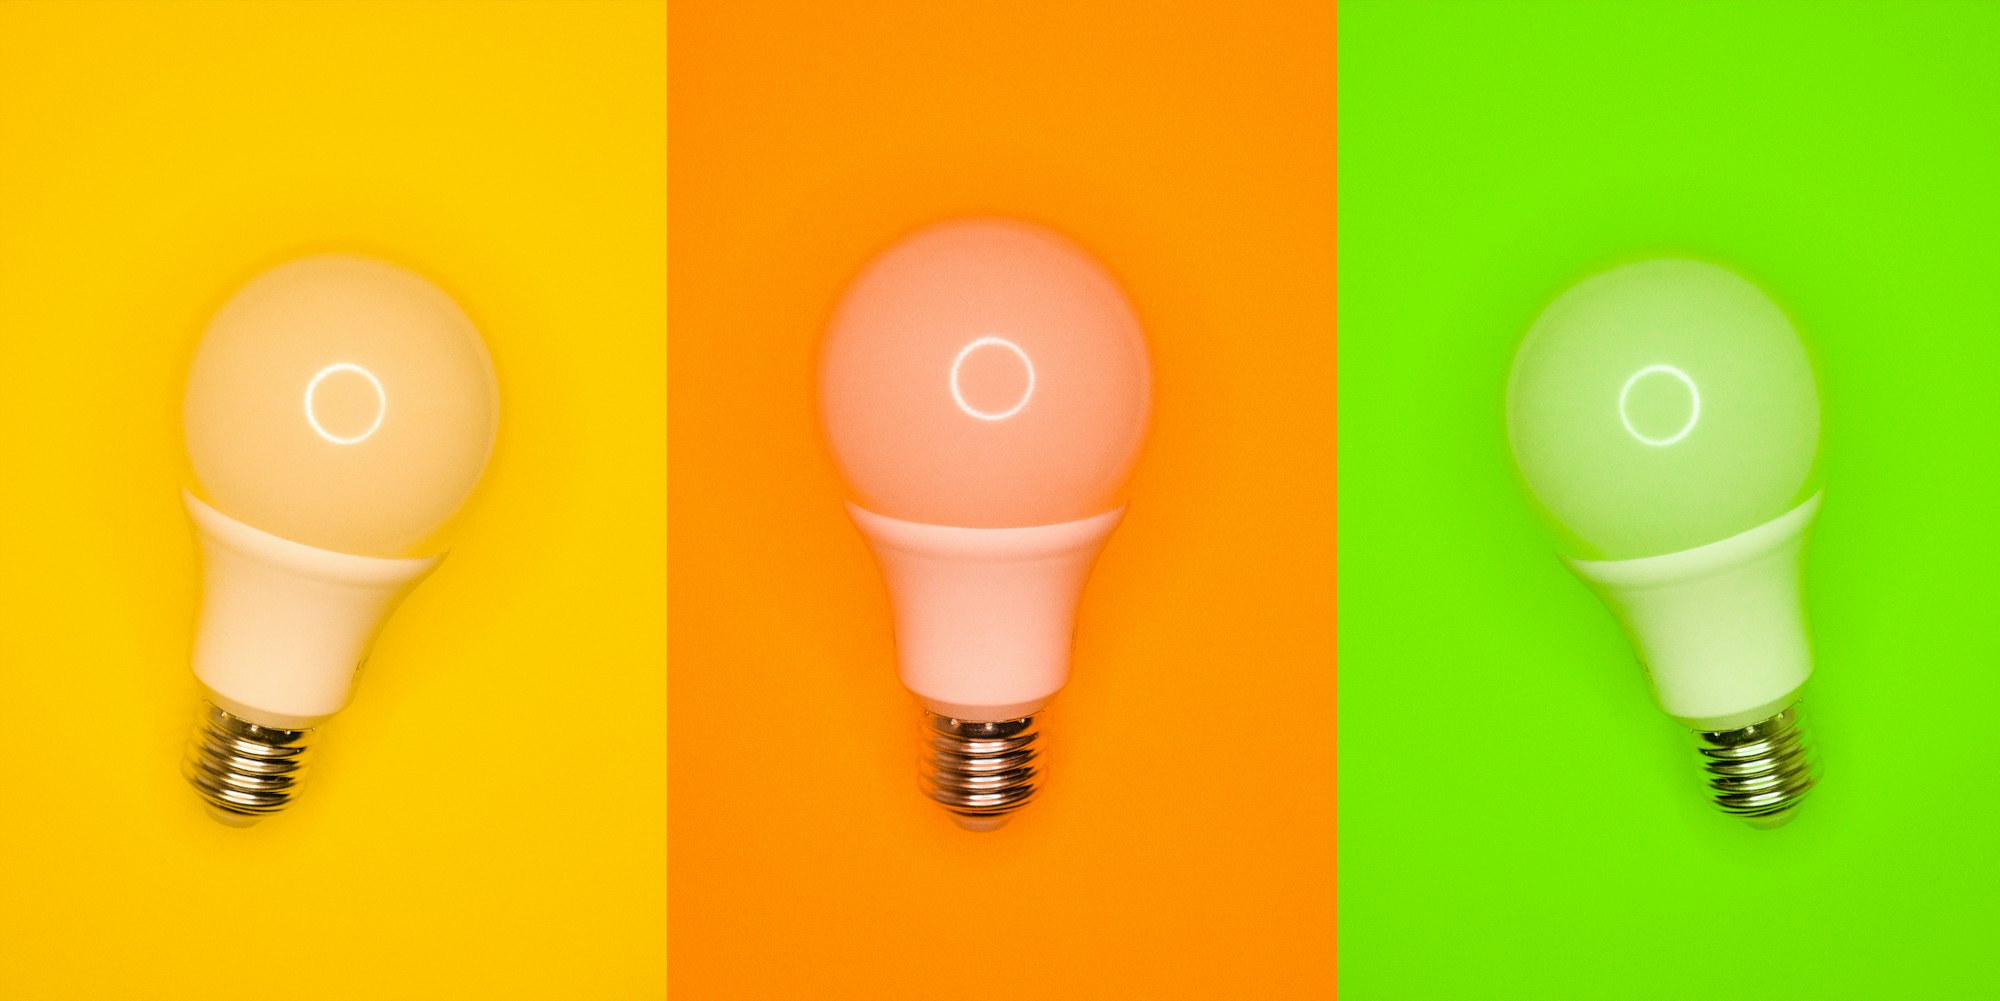 5 Things to Consider with Smart Lighting